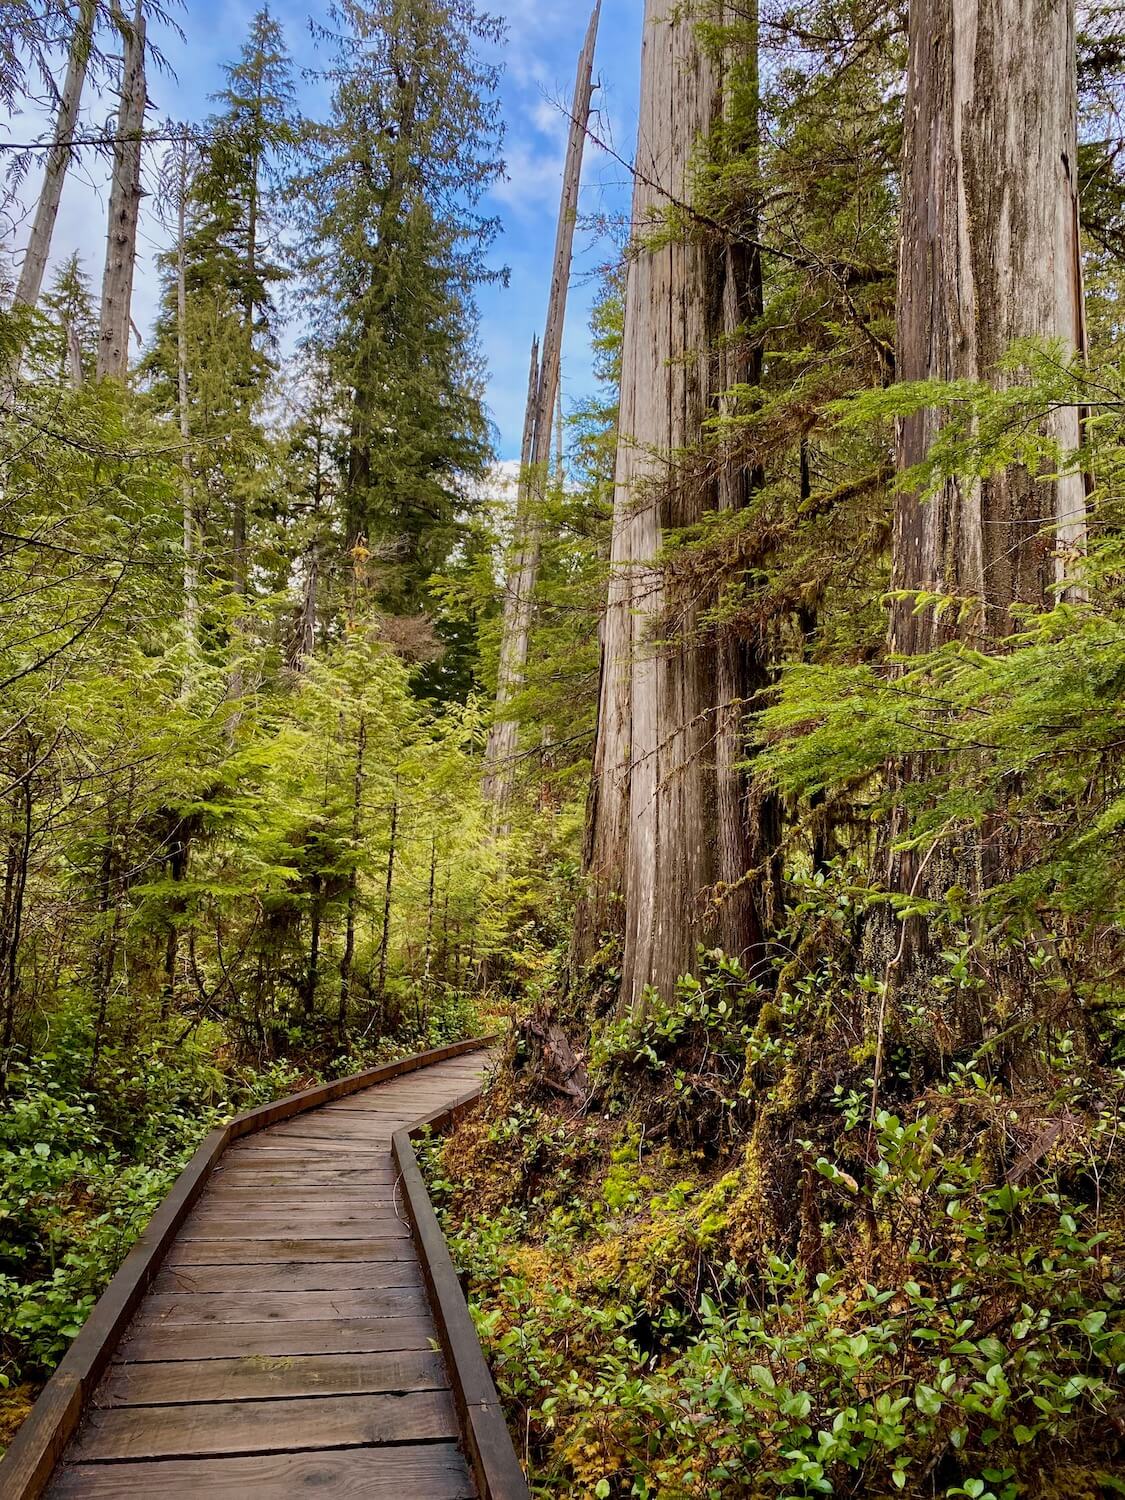 A boardwalk path forges straight ahead and turns right in a dense green old growth forest near Lake Quinault in the Olympic National Park. There are many different textures of green plants and moss in all directions.